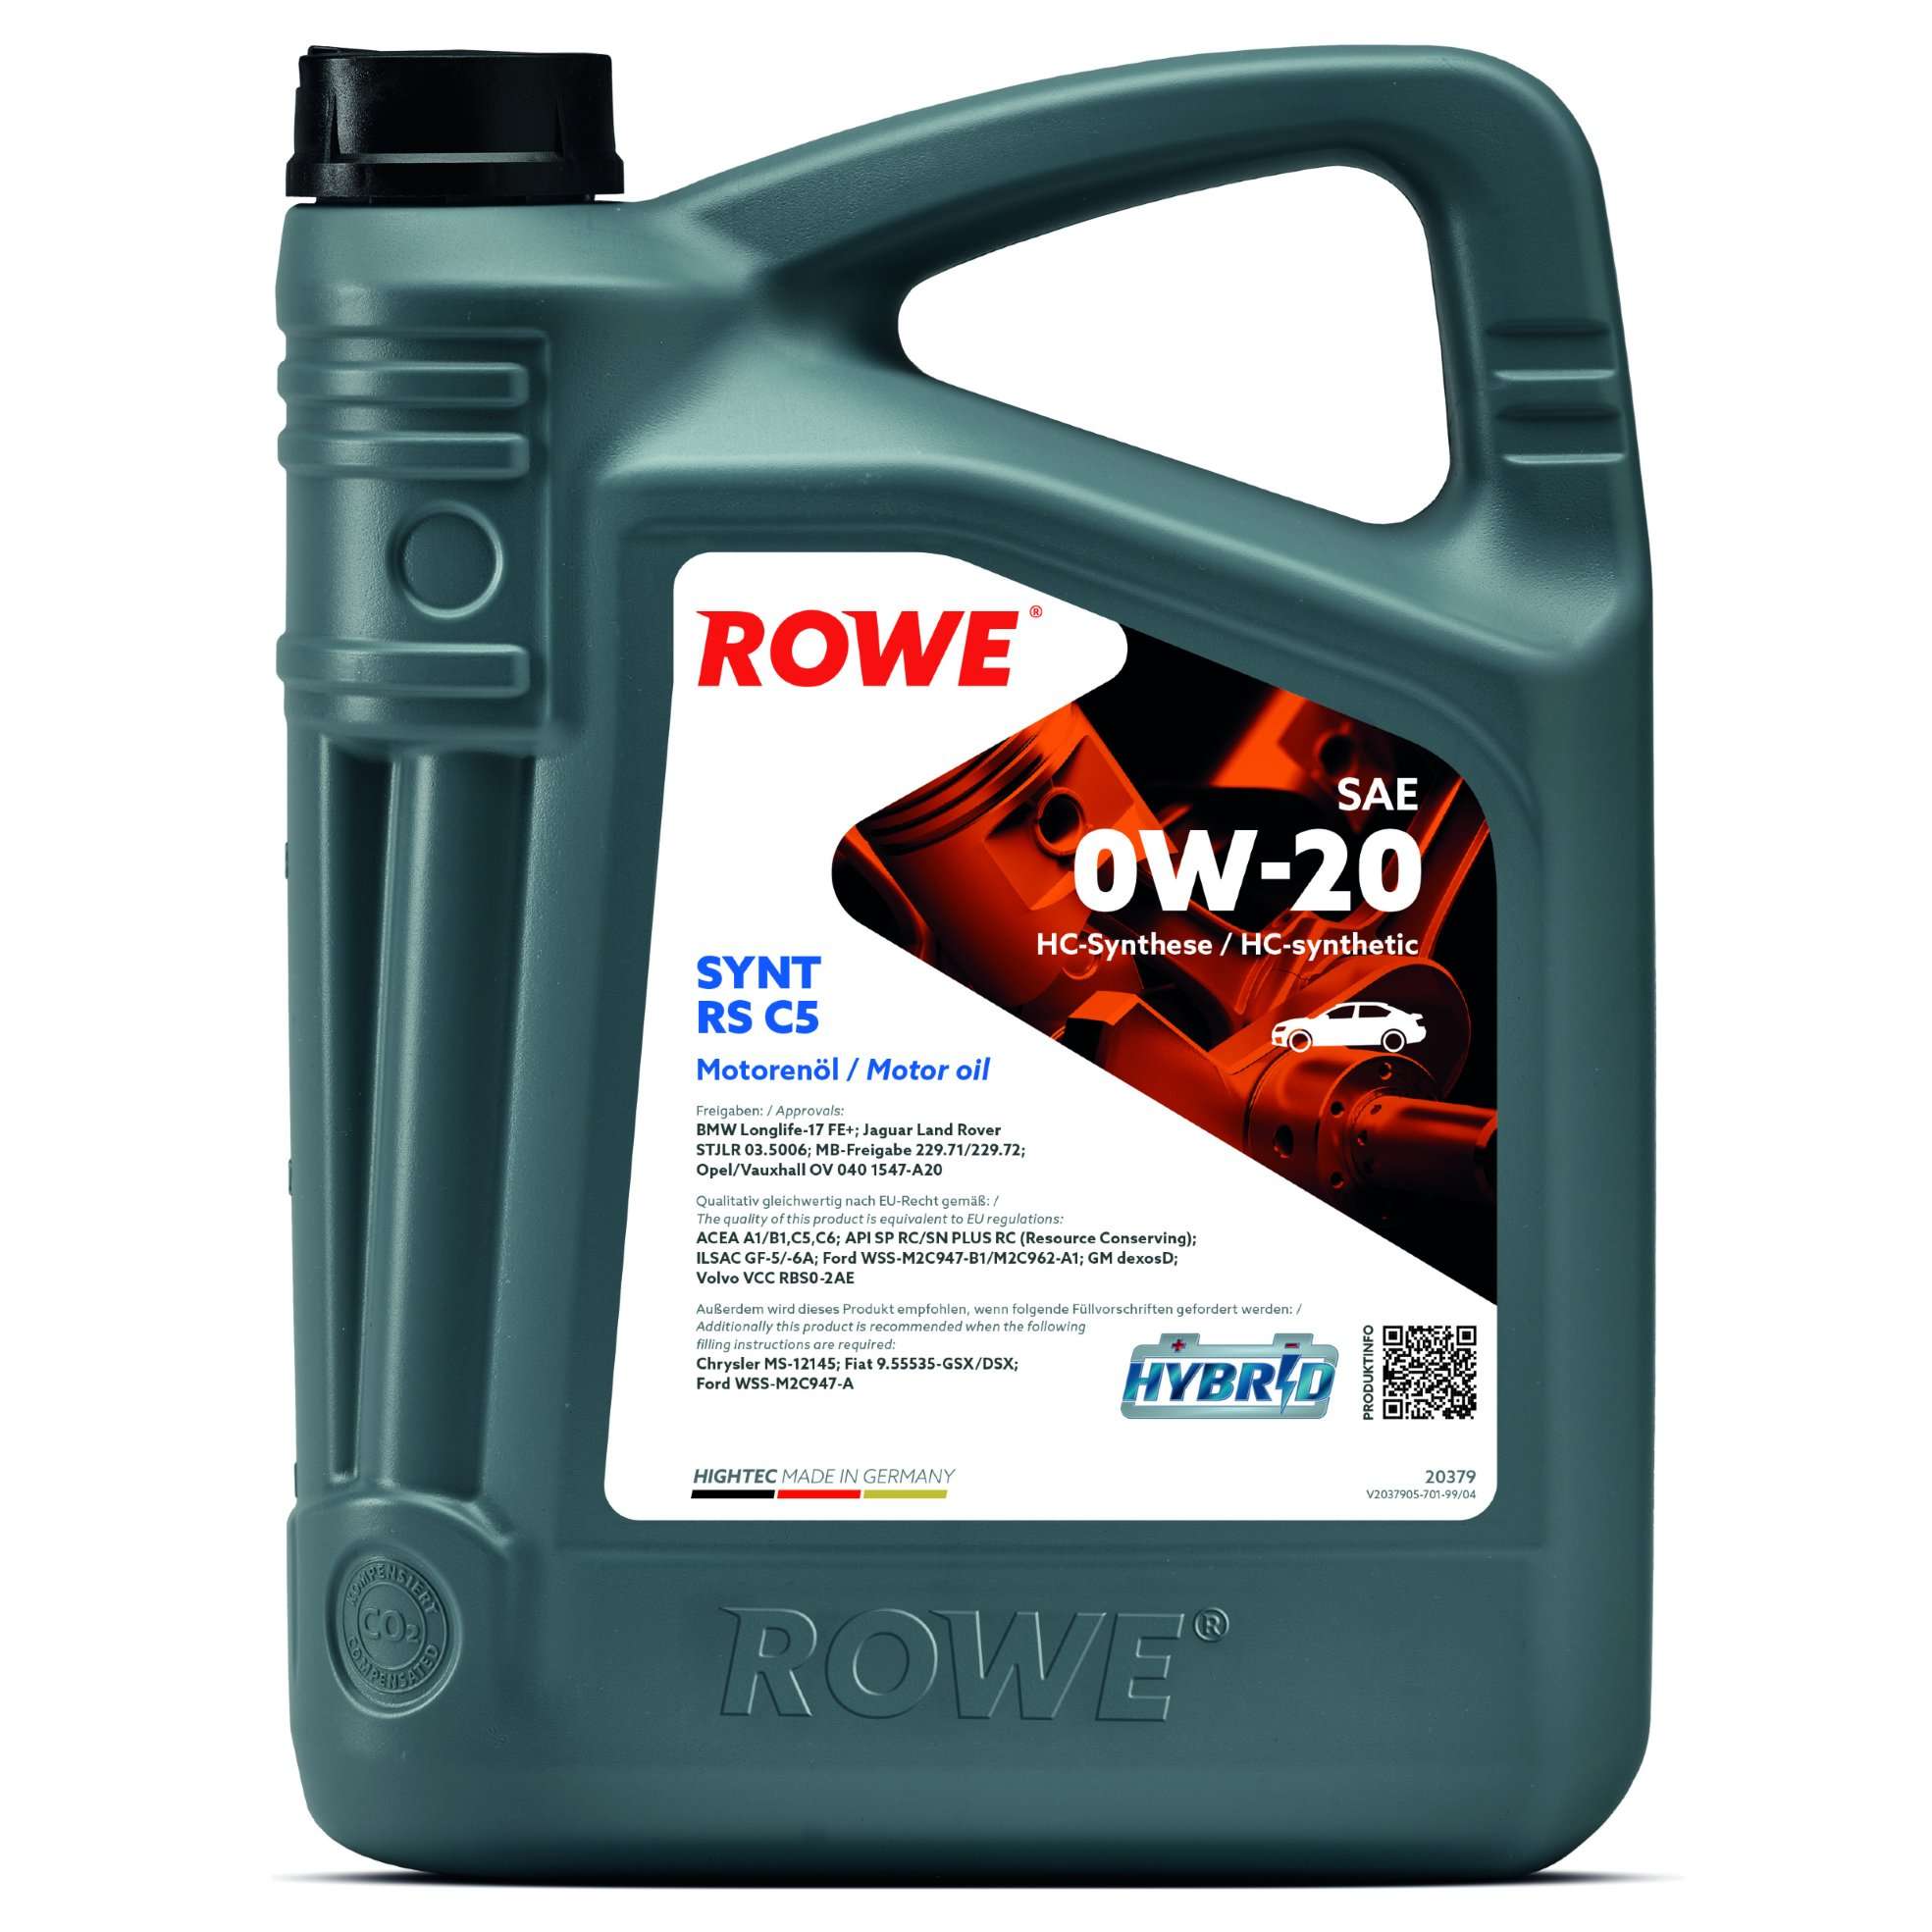 Моторное масло ROWE Synt RS C5 0W-20 5 л, 20379-0050-99